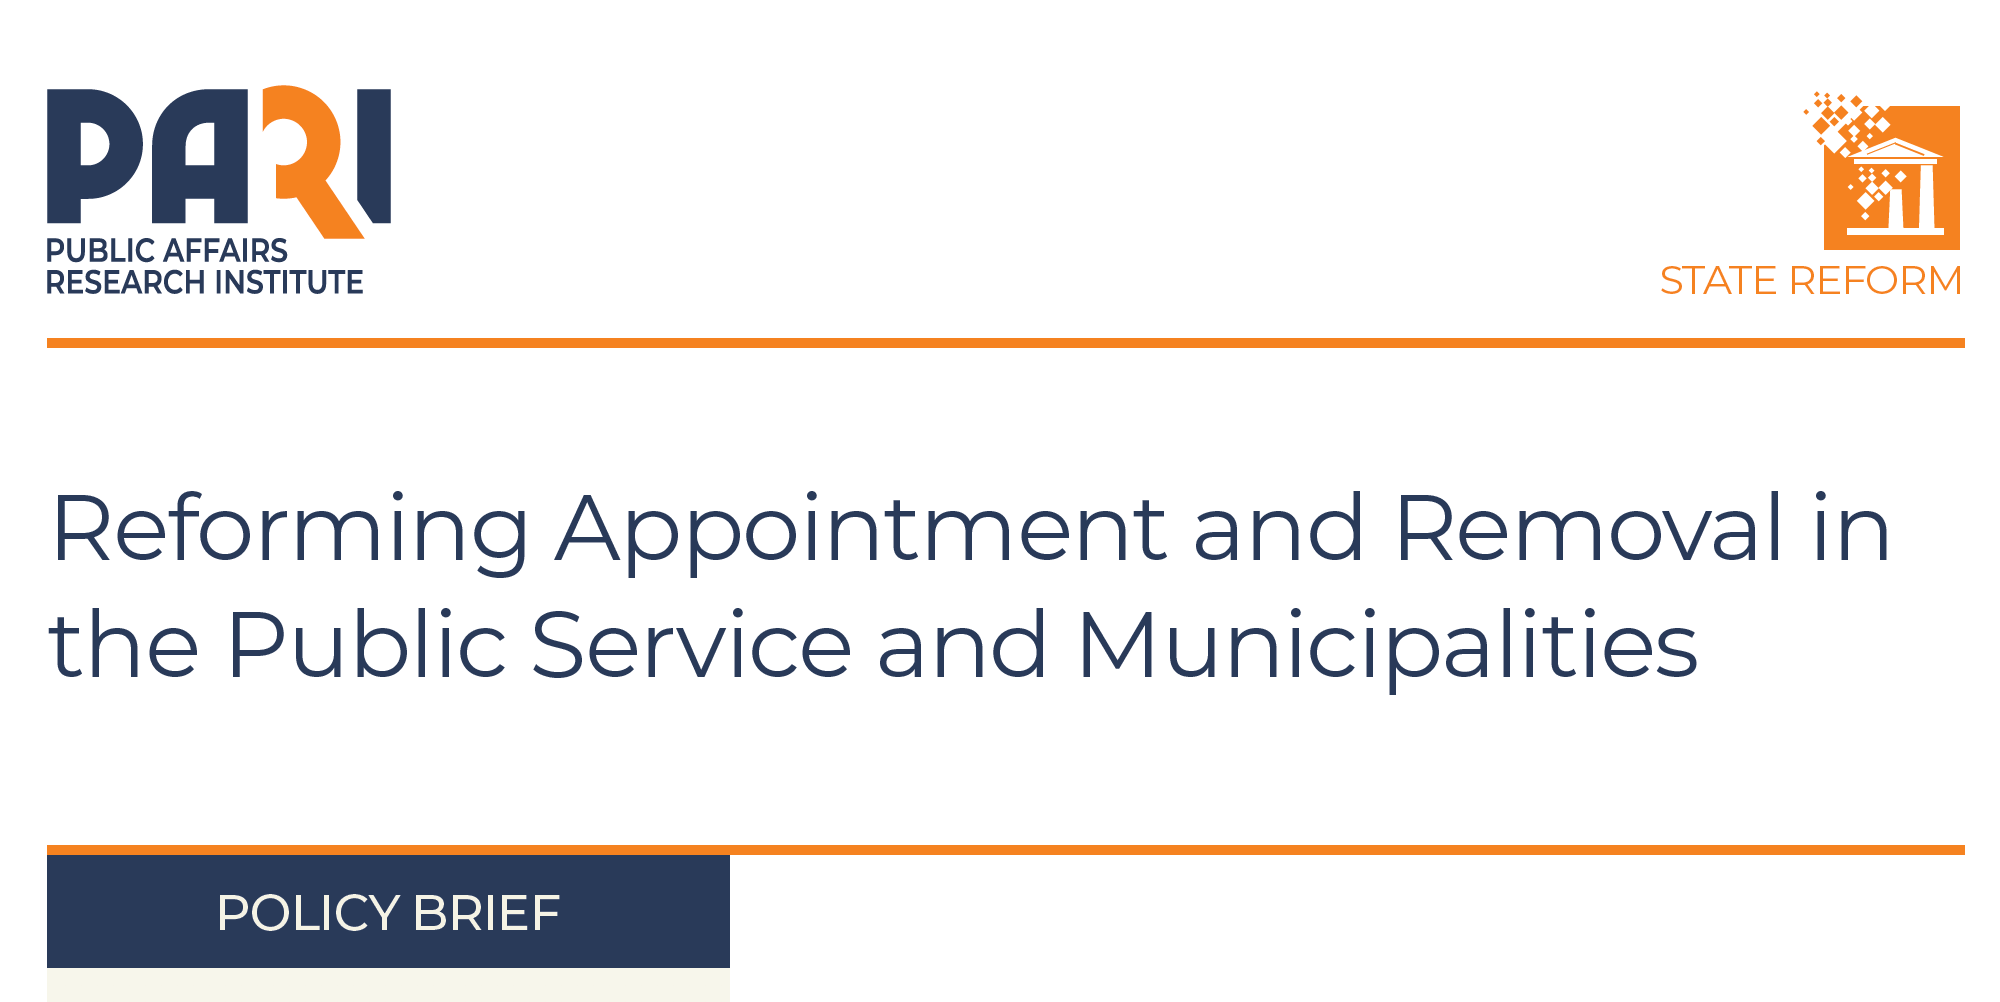 Policy Brief | Reforming Appointment and Removal in the Public Service and Municipalities